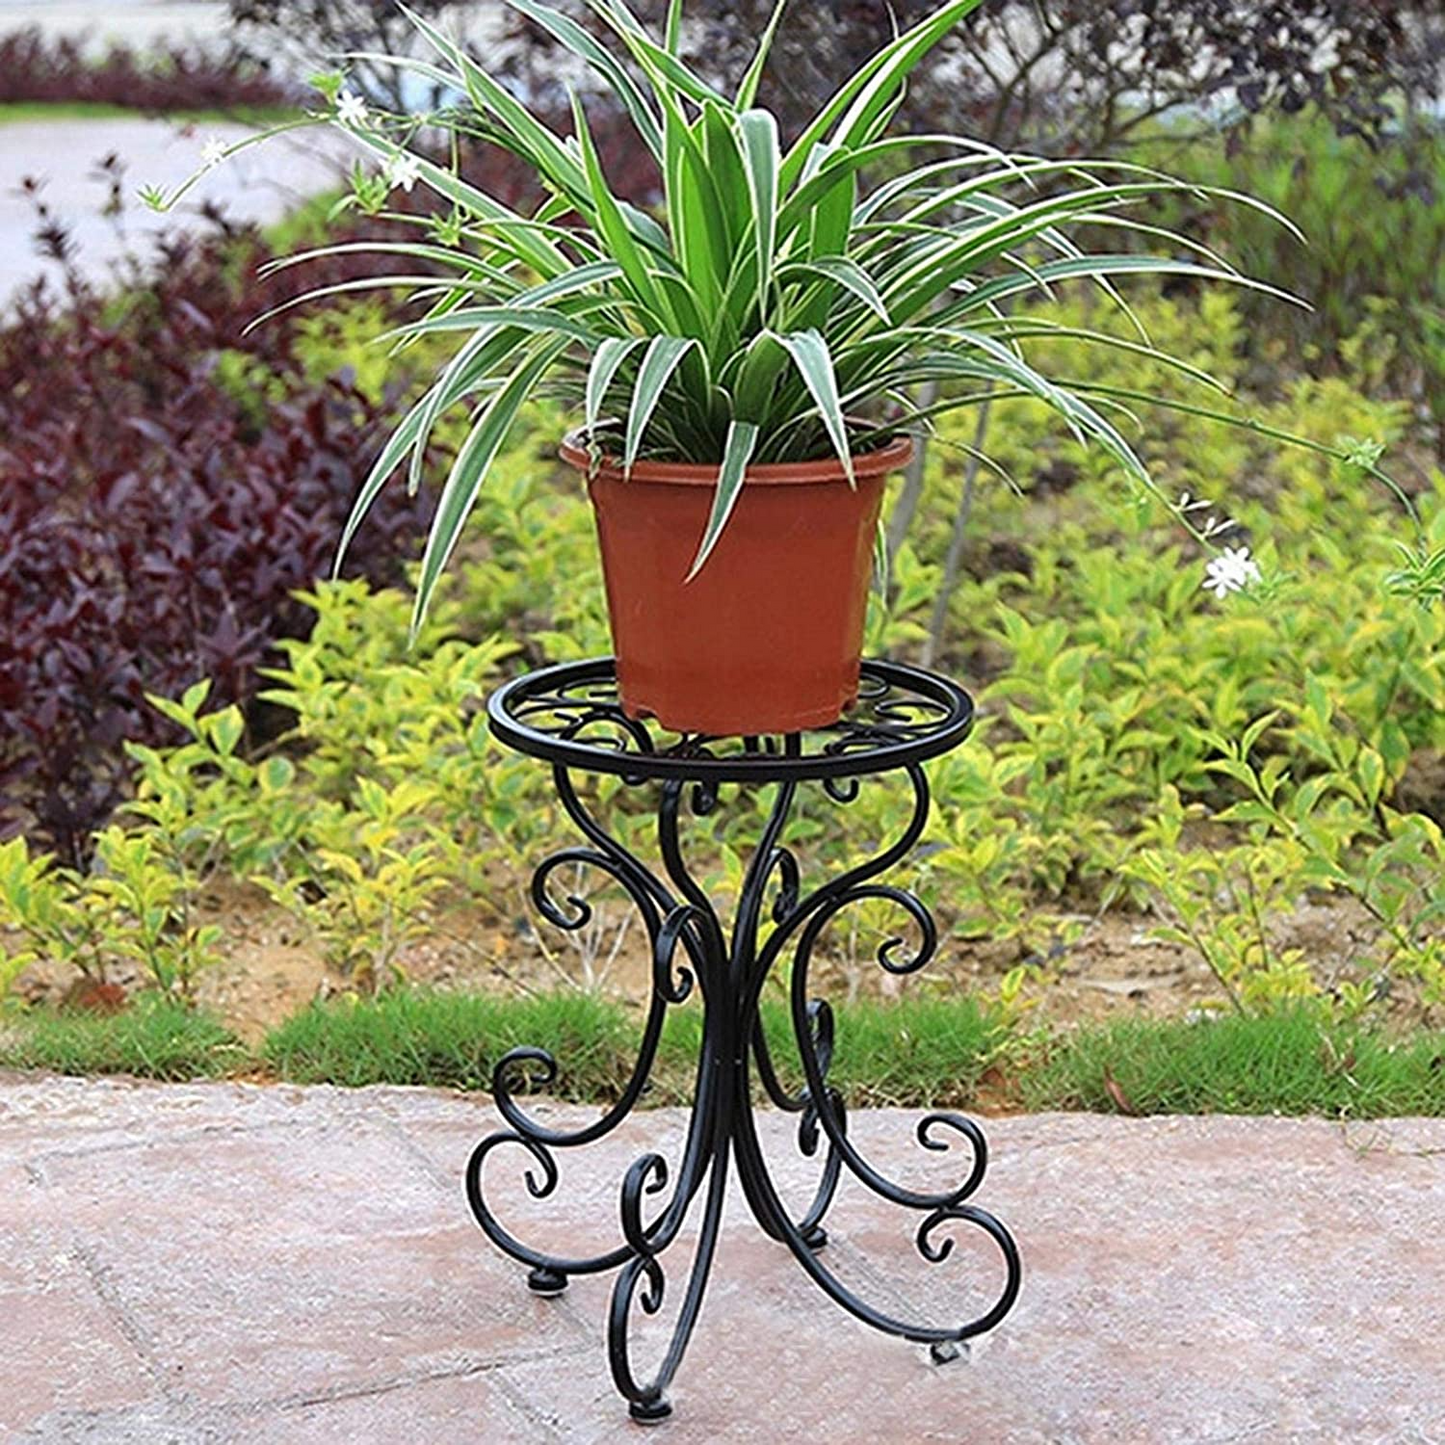 Bhulife Flower Pot Stand for Balcony Living Room Outdoor Indoor Plants Plant Holder for Home Decor